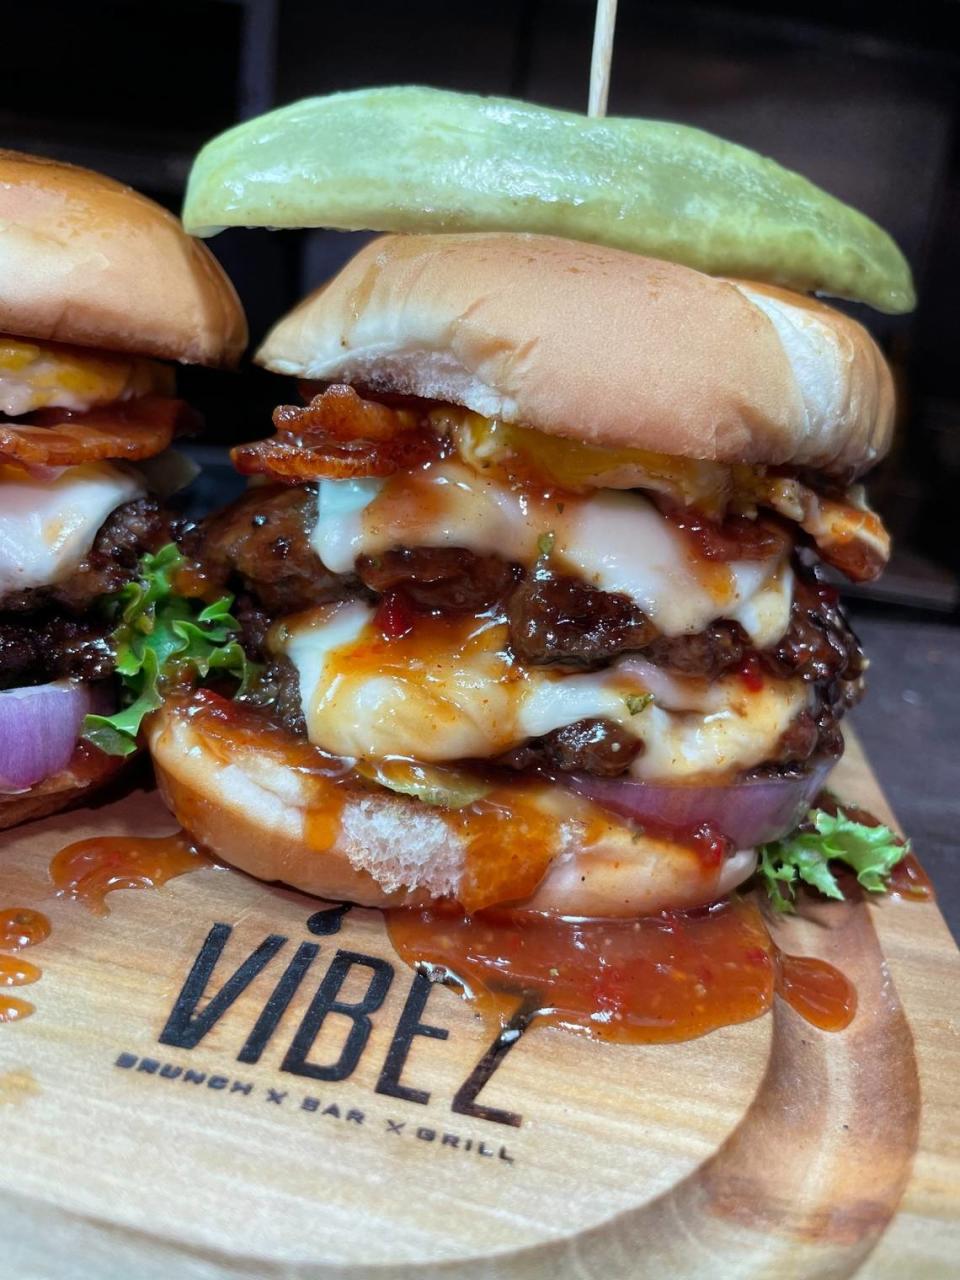 The Jugg Vibez Burger from VIBEZ came in second in the 2022 Macon Burger Week contest. Courtesy Macon Burger Week